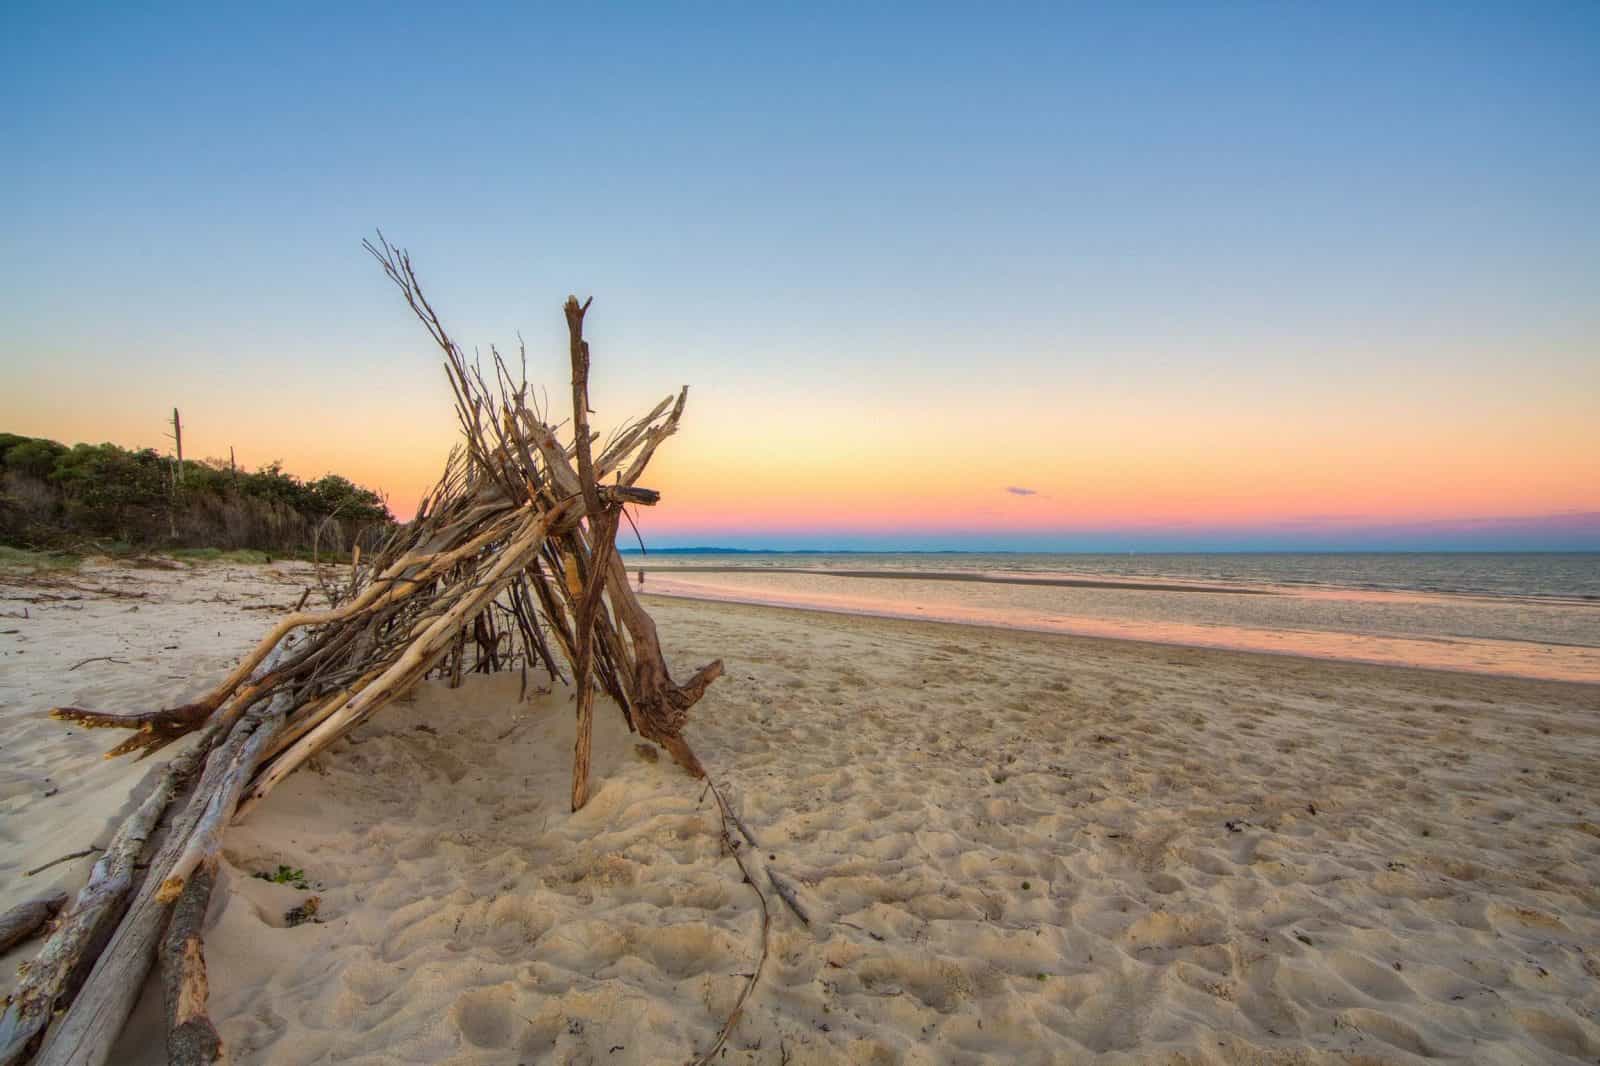 Large triangular tent made out of sticks and branches on the beach at sunset